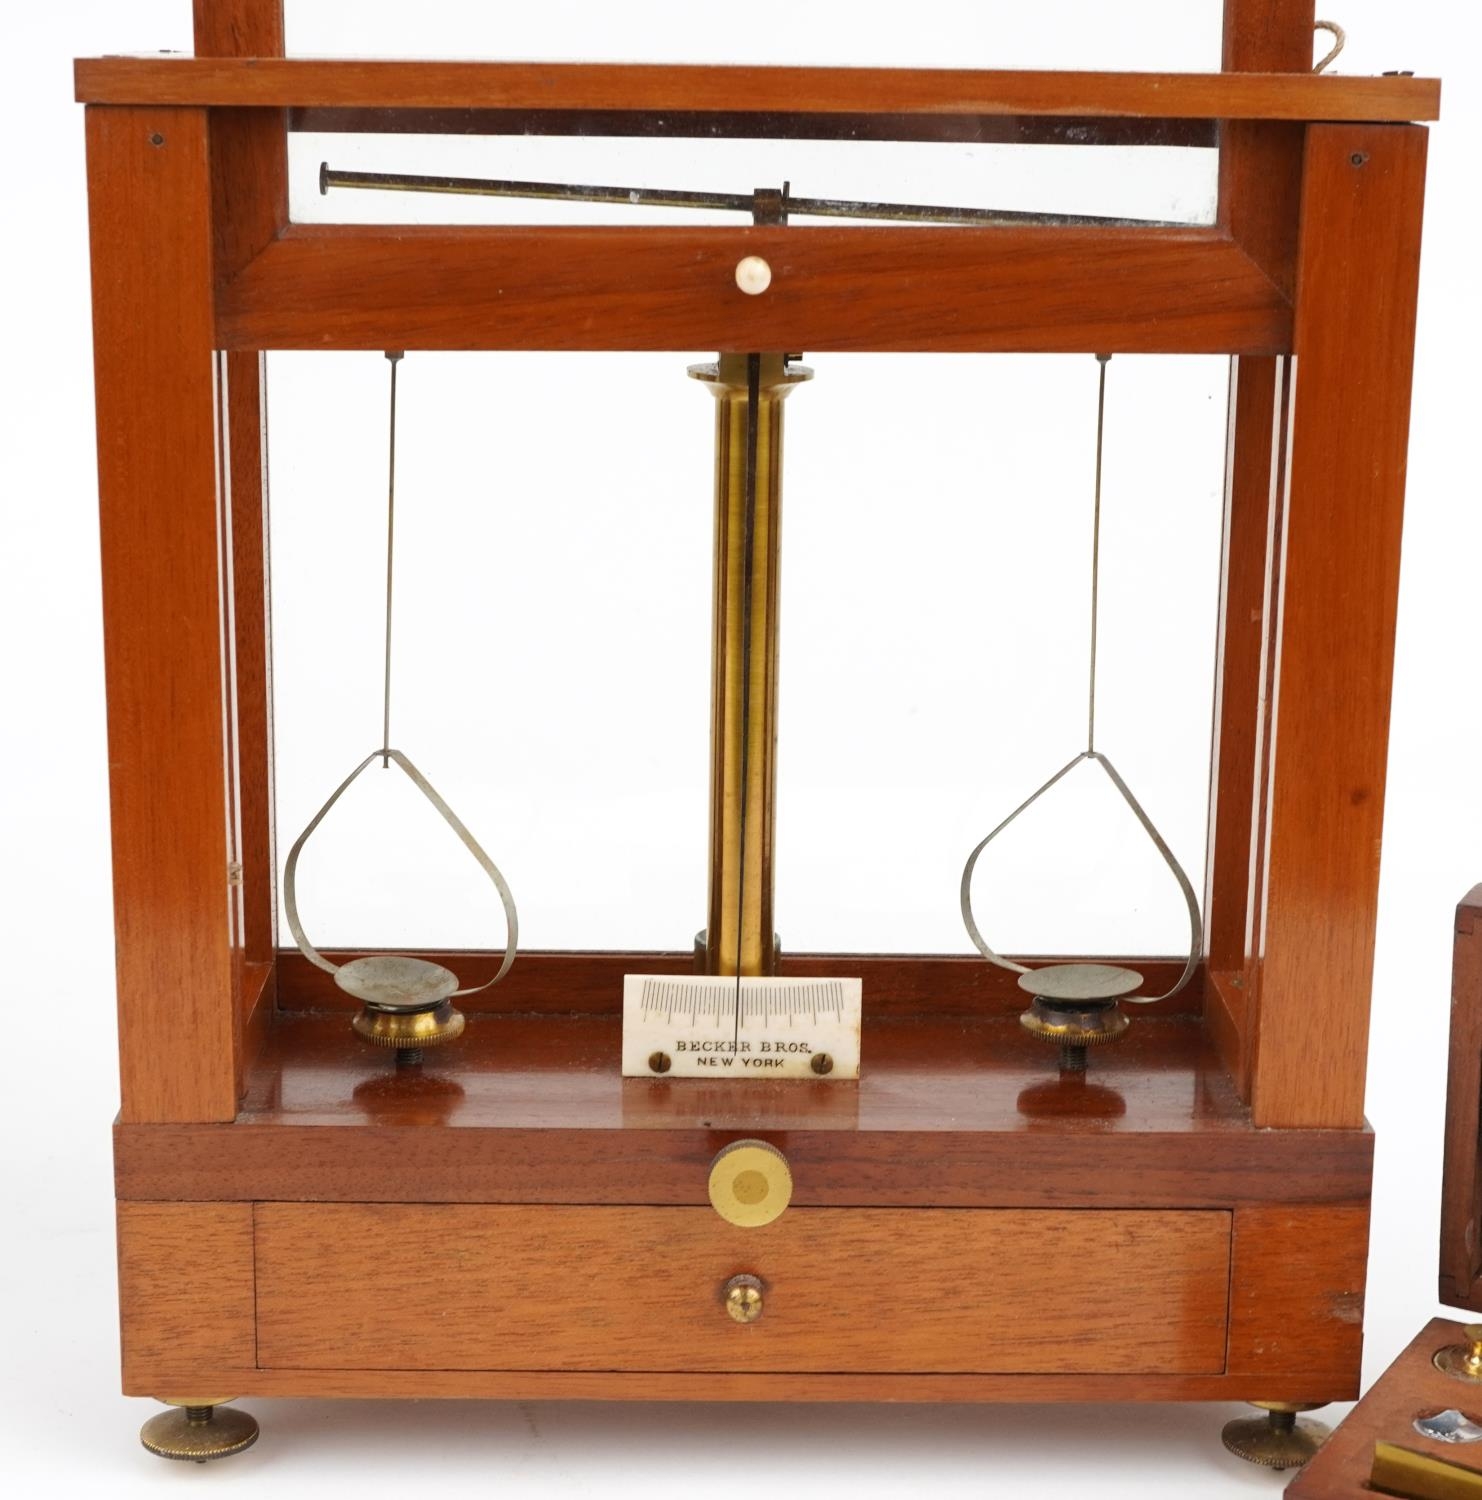 Becker Bros of New York, mahogany cased balance scales with mahogany travel case and set of brass - Image 3 of 6